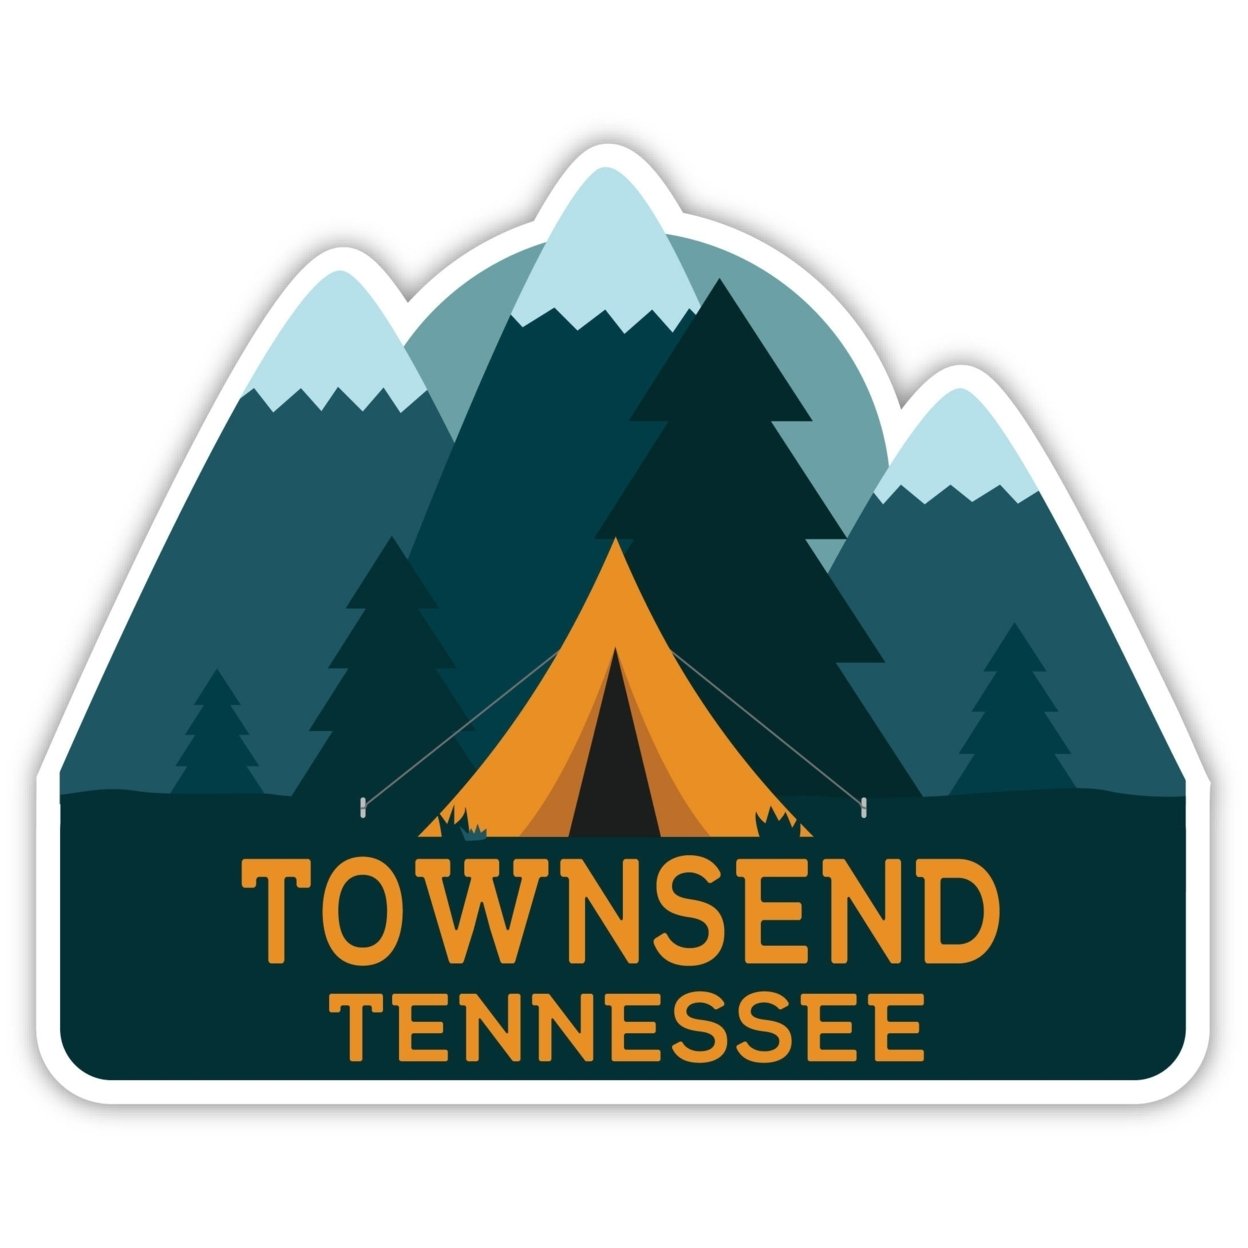 Townsend Tennessee Souvenir Decorative Stickers (Choose Theme And Size) - Single Unit, 2-Inch, Tent